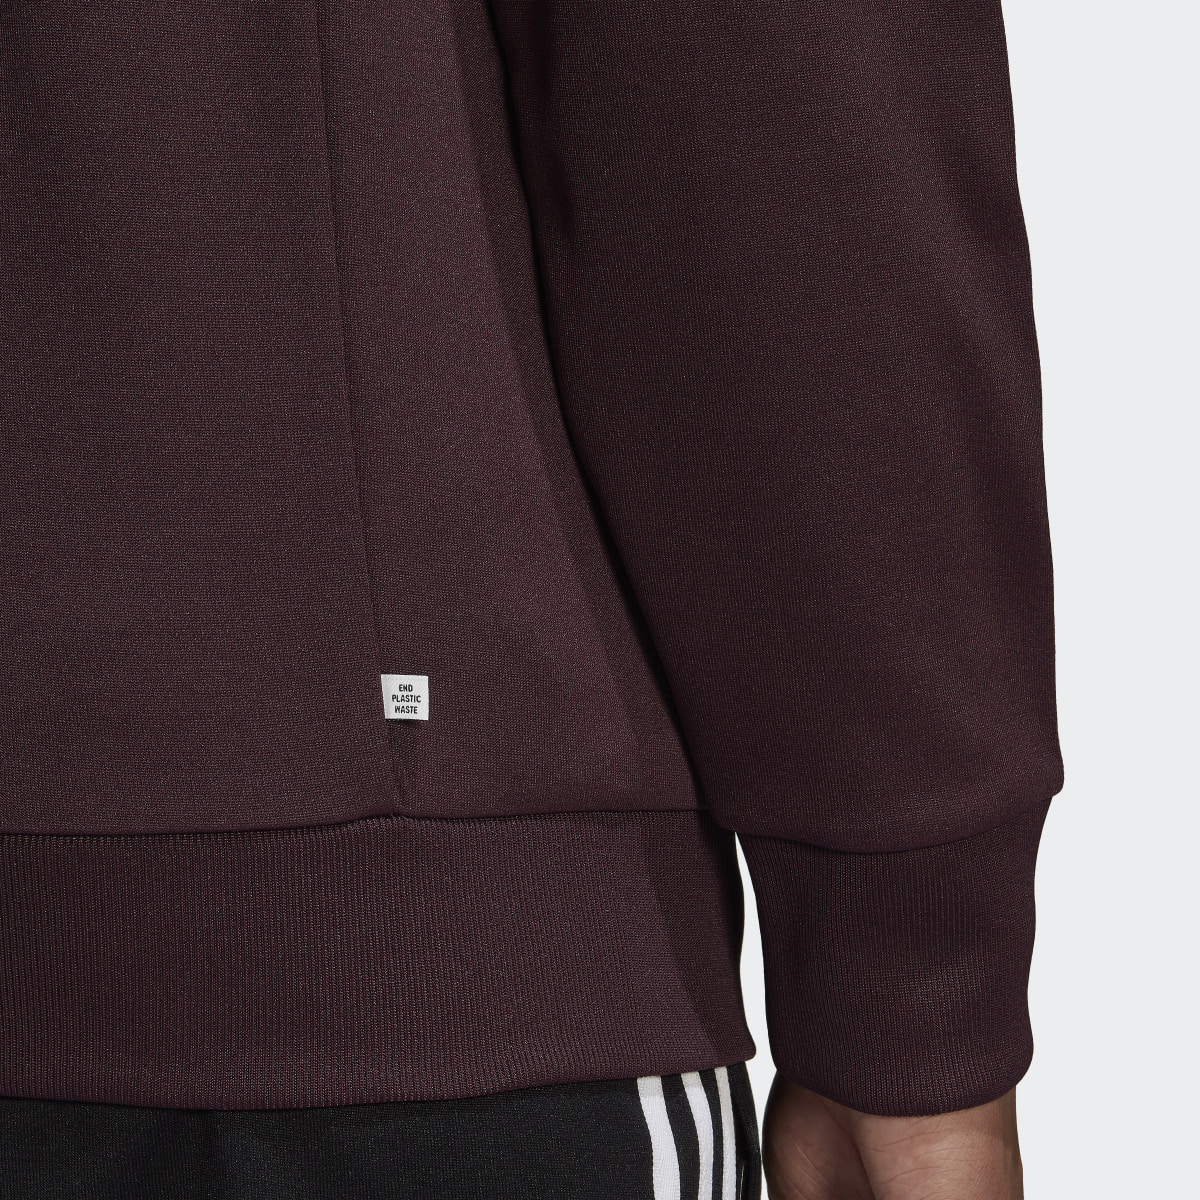 Adidas SST Track Top. 8